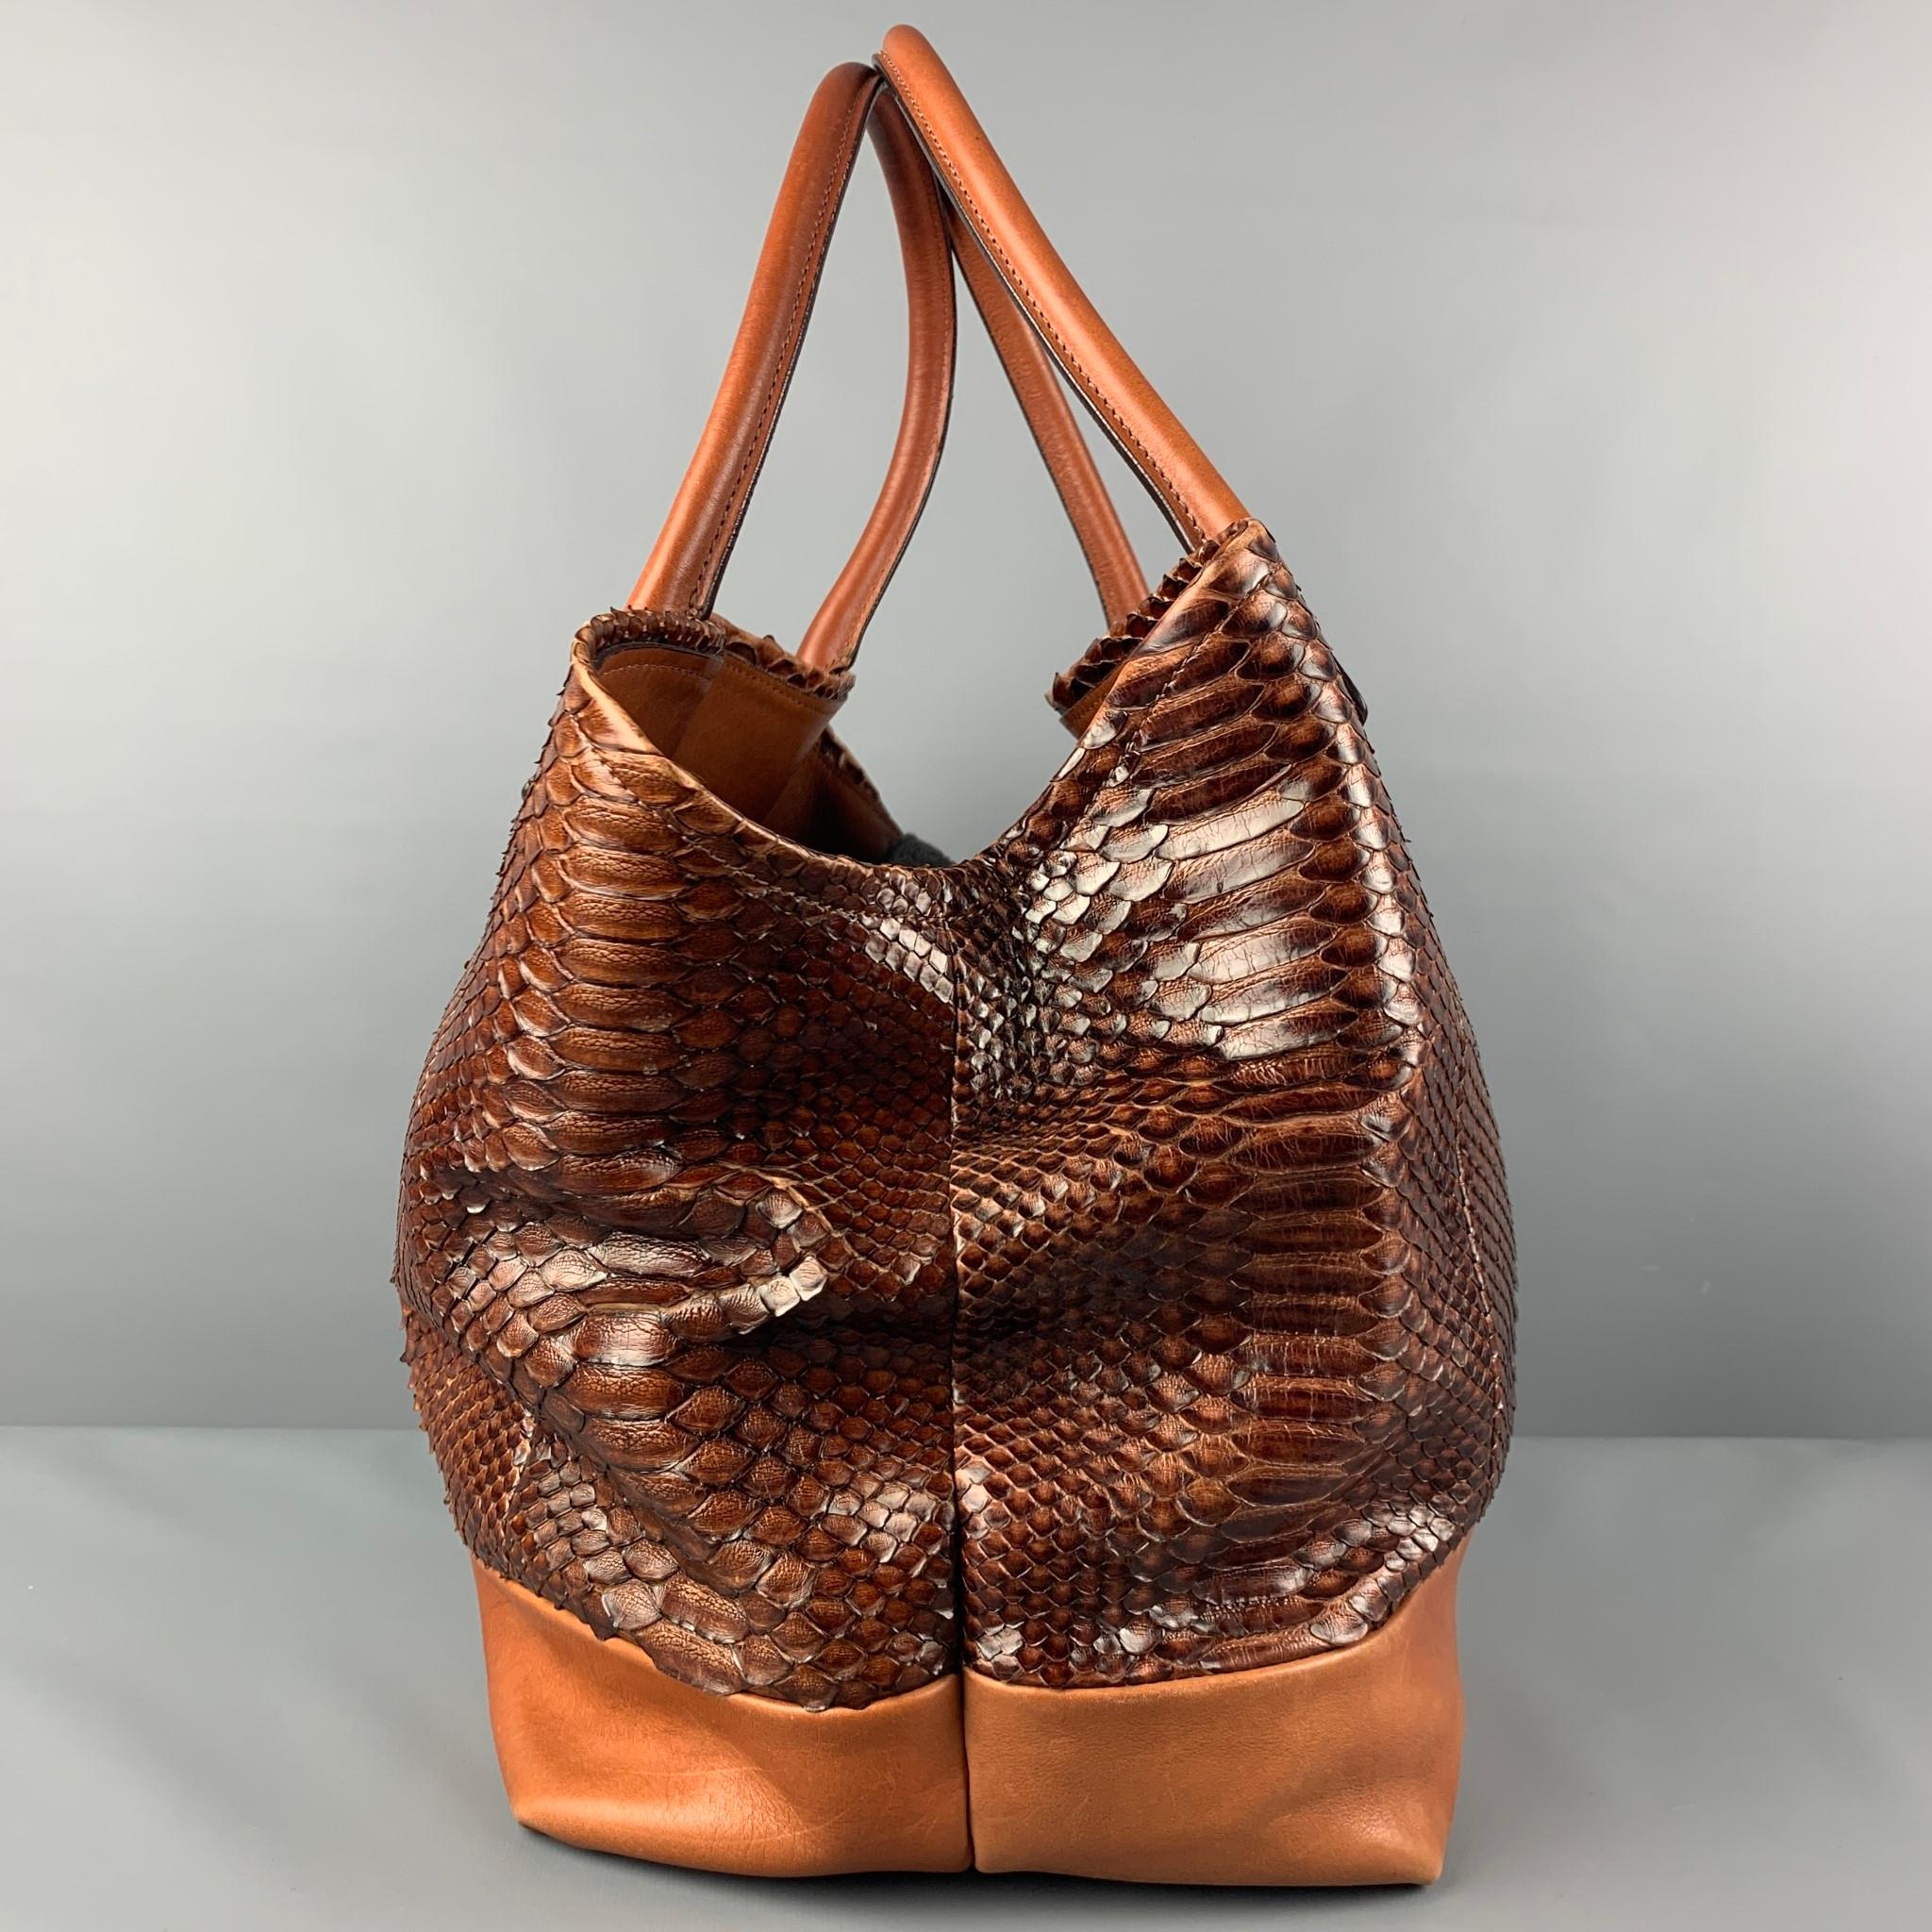 BRUNELLO CUCINELLI tote comes in a cognac embossed calfskin featuring top handles, gray flannel interior, dual compartment, open top, and a inner zipper closure. Made in Italy. 

Very Good Pre-Owned Condition.

Measurements:

Length: 11.5 in.
Width: